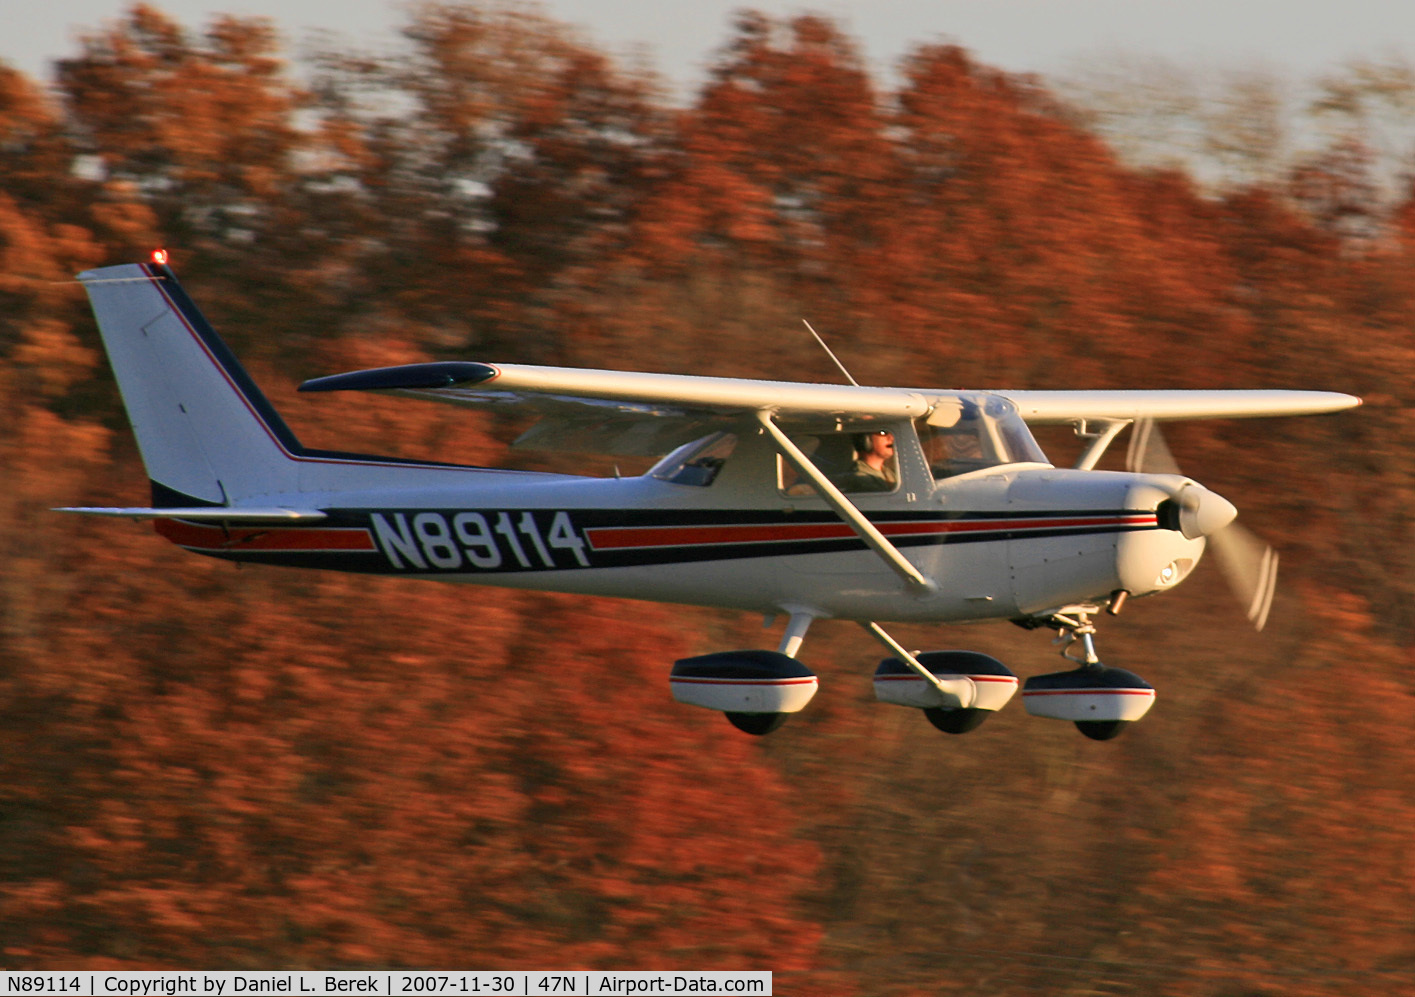 N89114, 1978 Cessna 152 C/N 15282638, A nice Cessna 152 gently coasts in on an autumn evening.